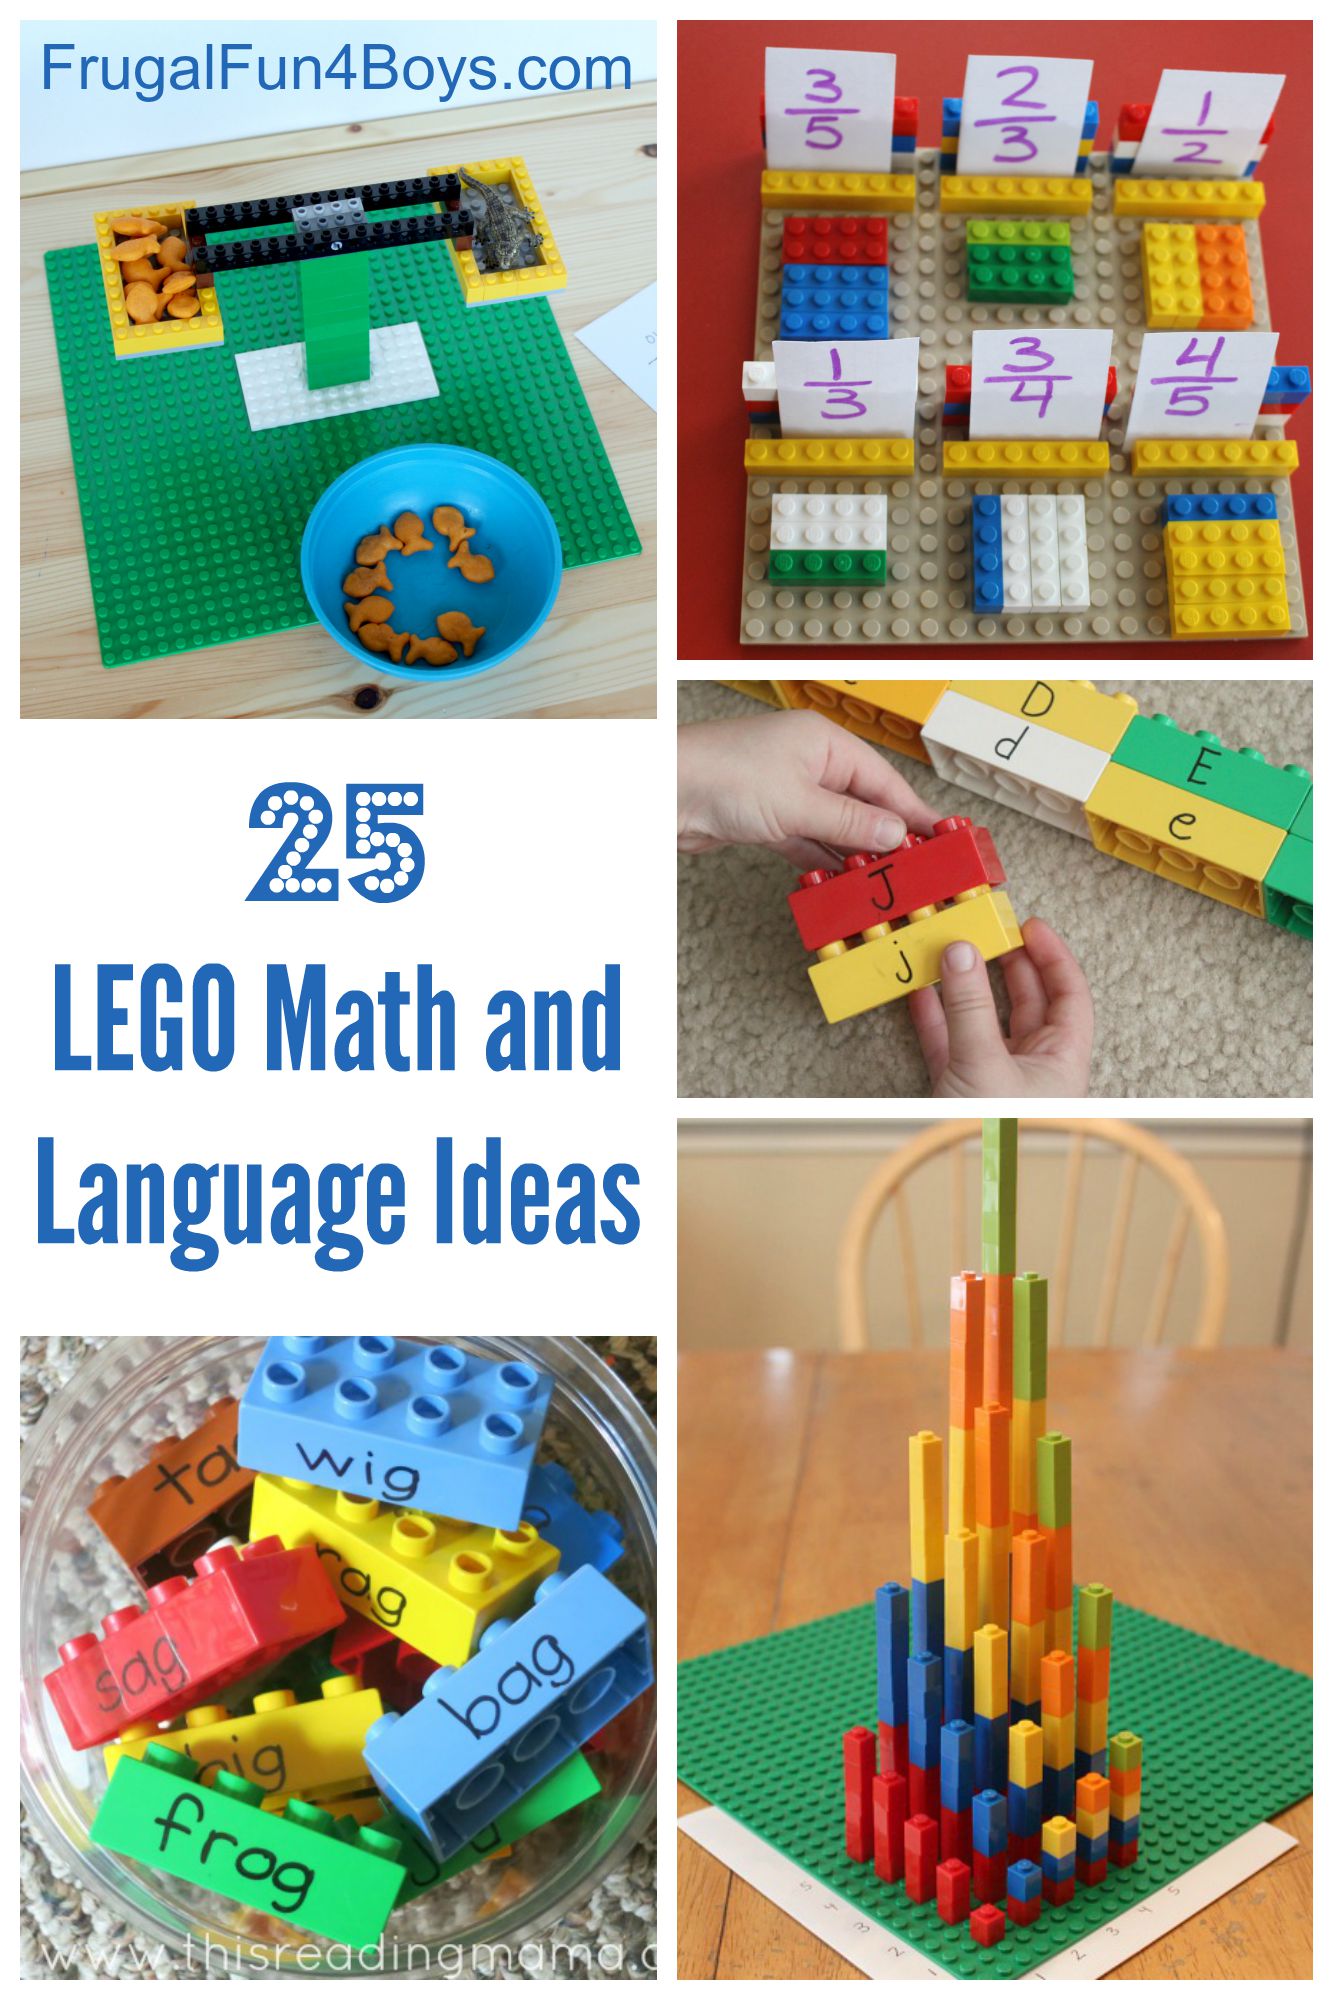 25+ Ideas for Learning with LEGO! Math and Language Arts Ideas